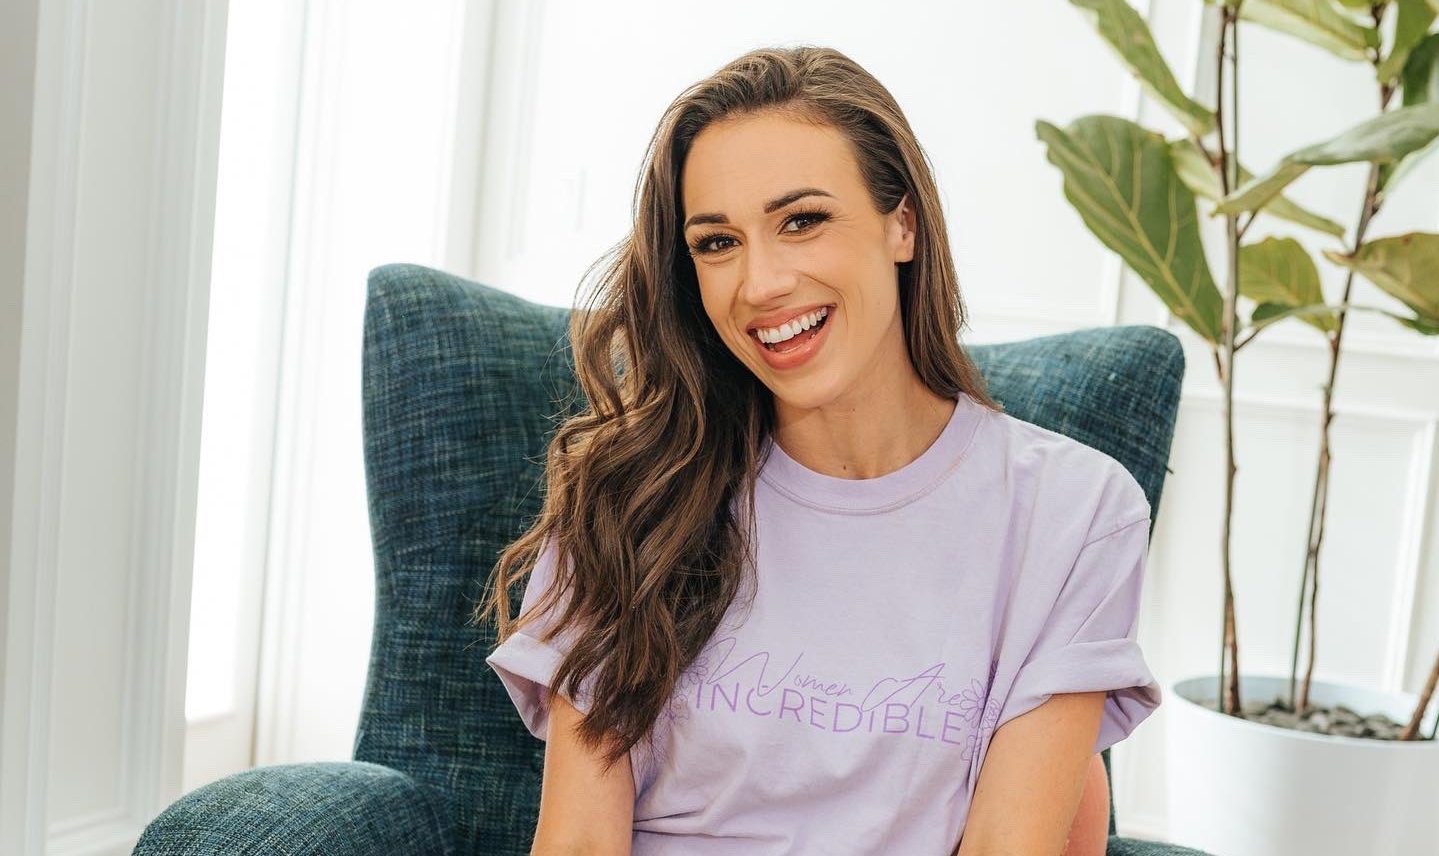 Colleen Ballinger Net worth, age, relationship, career, family and